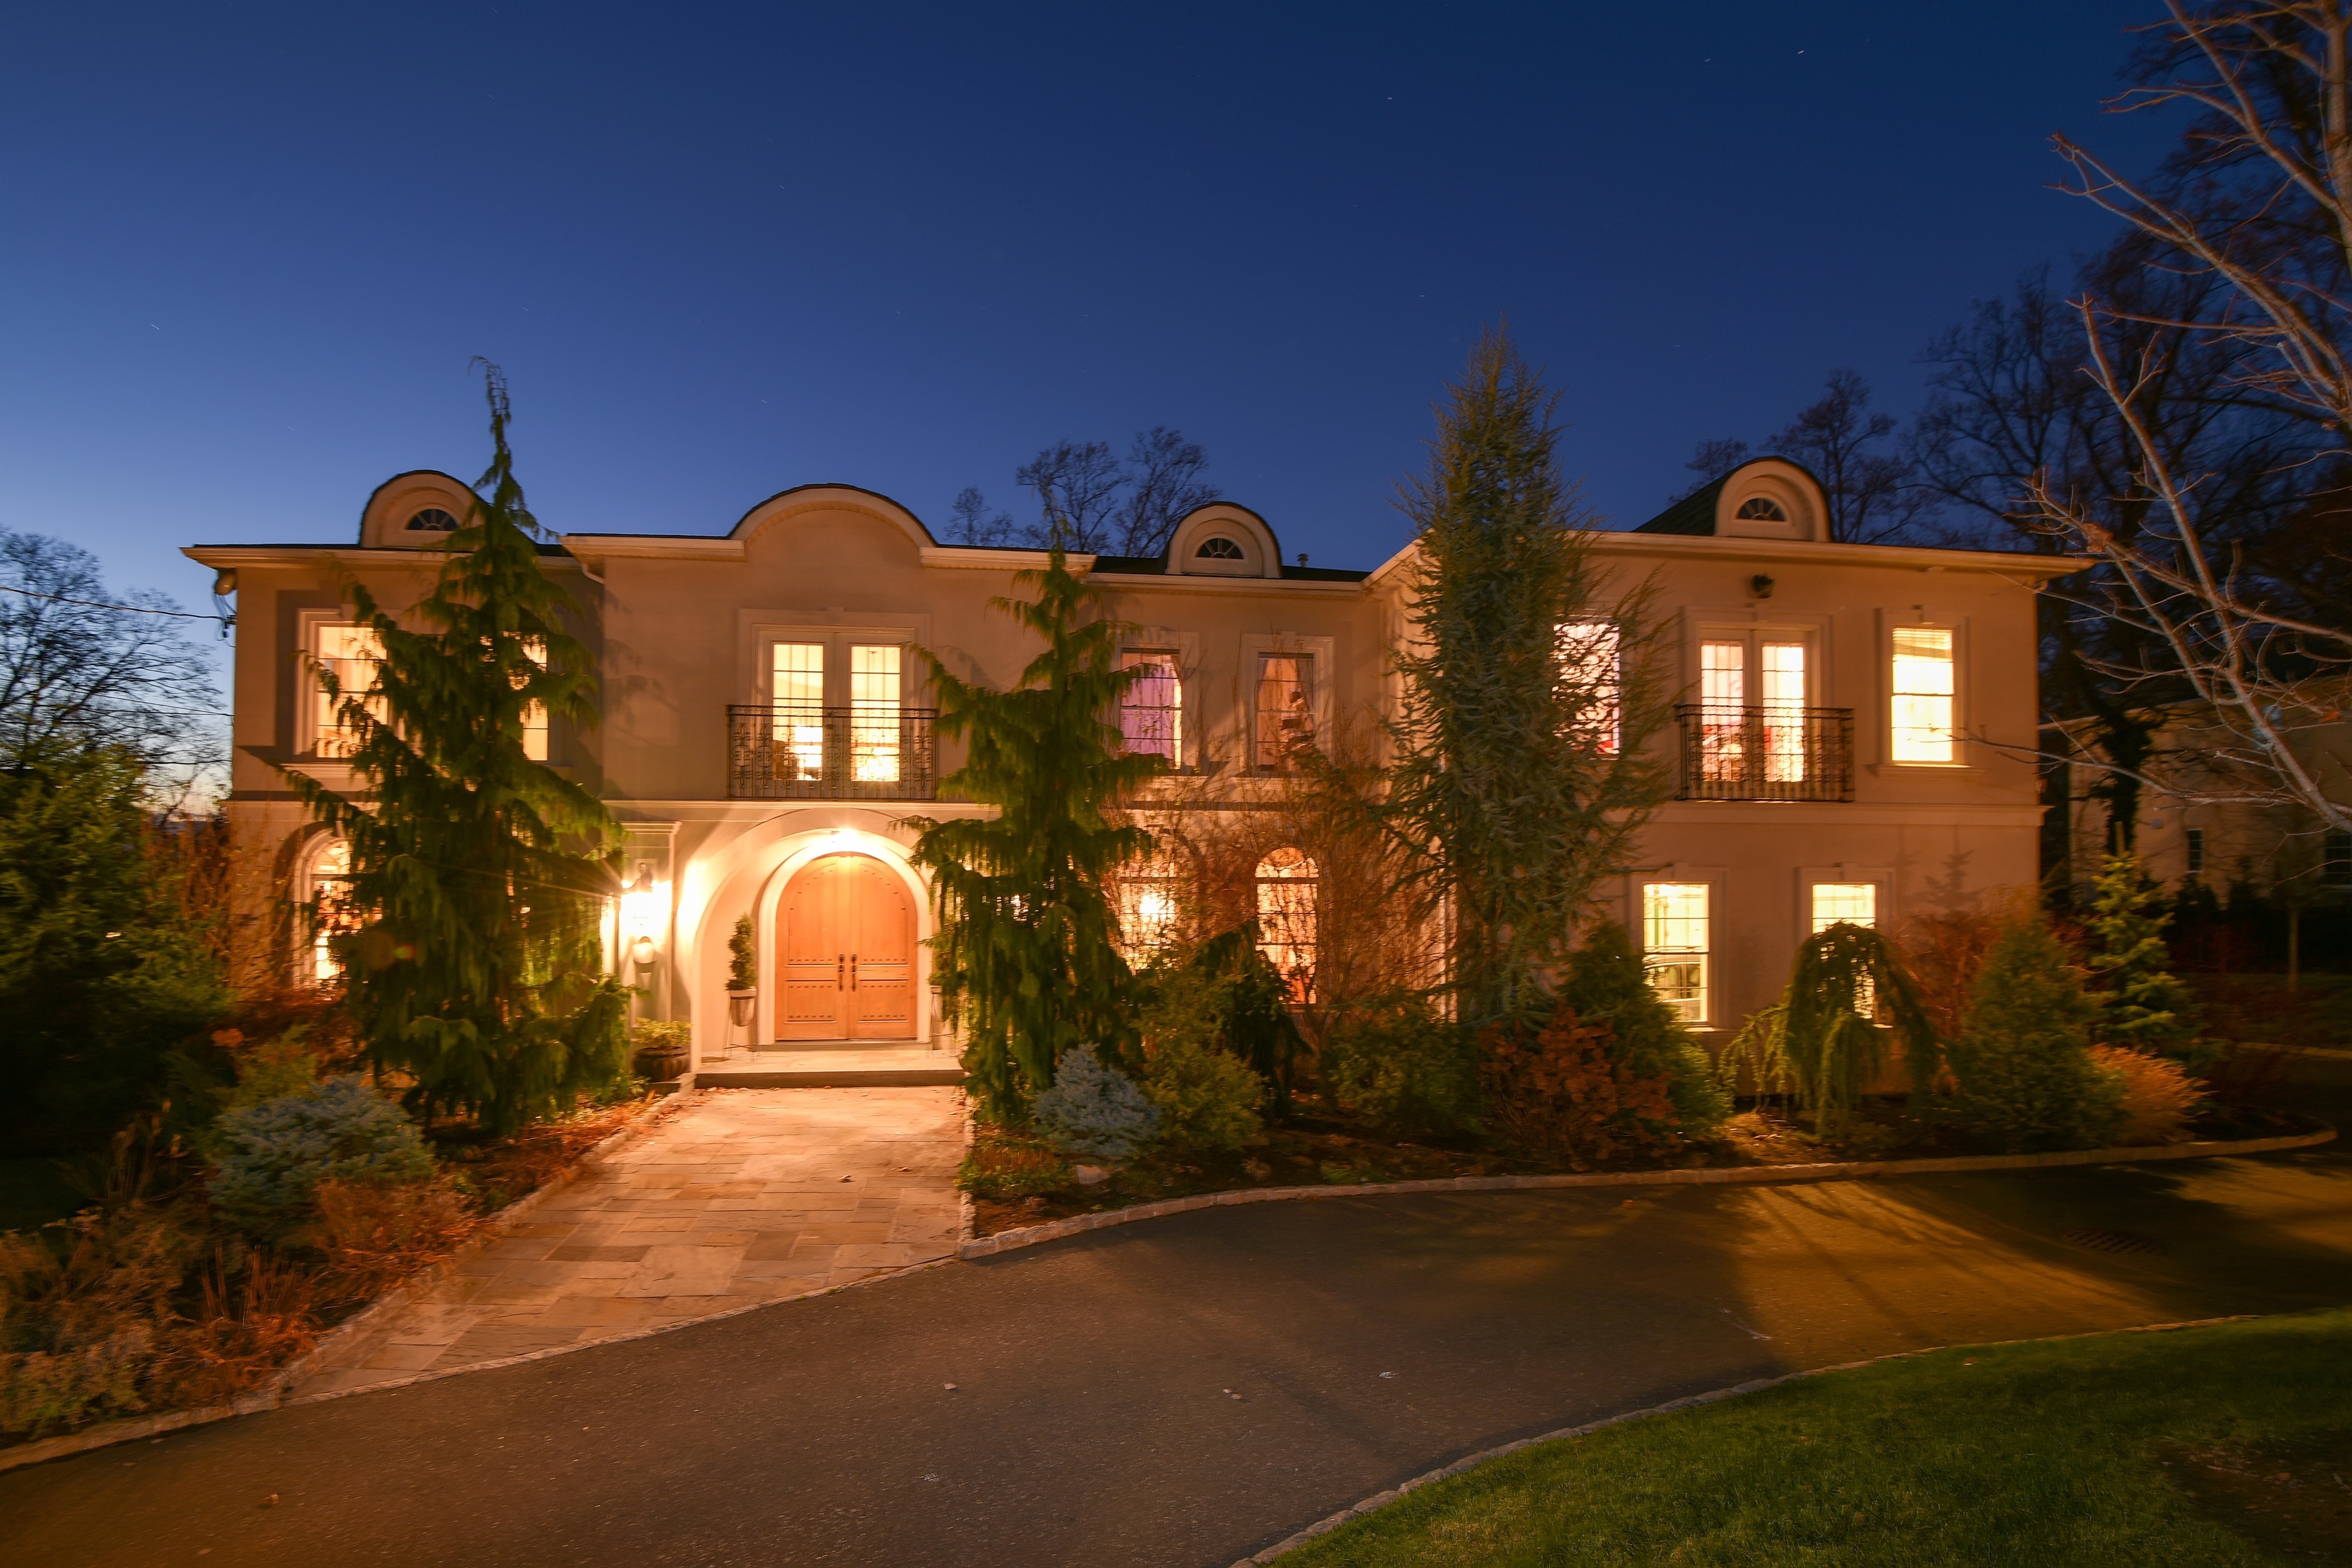 213 engle st tenafly nj 07670 front house night view 4